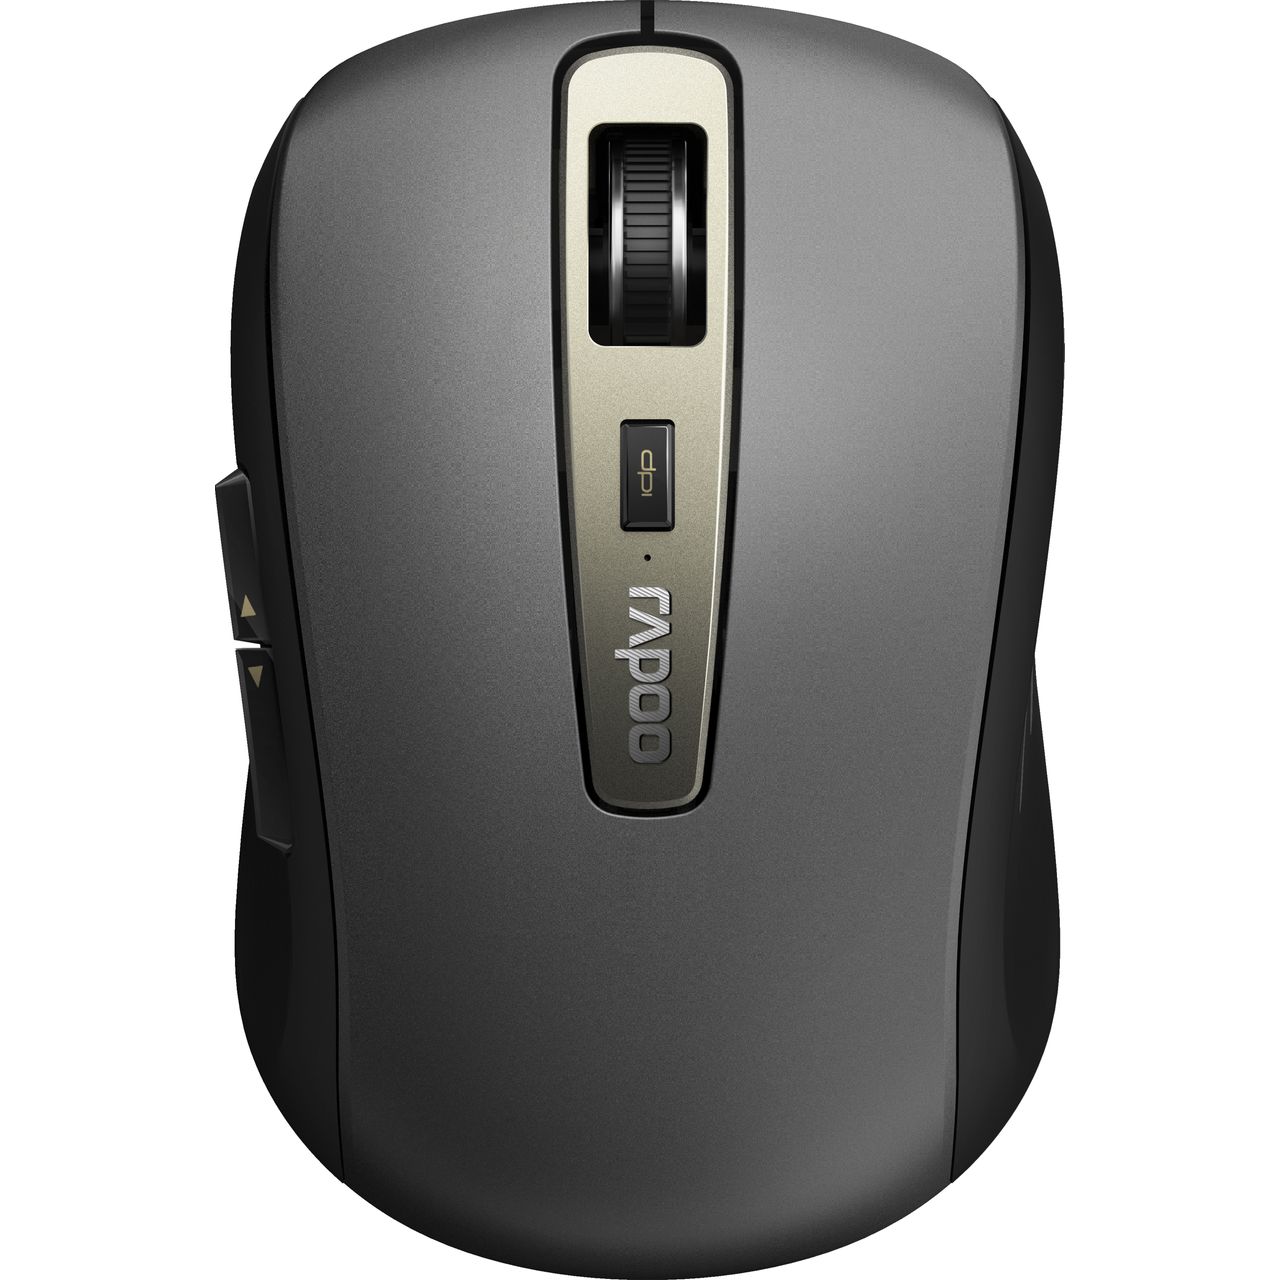 Rapoo MT350 Bluetooth / Wireless USB Optical Mouse Review